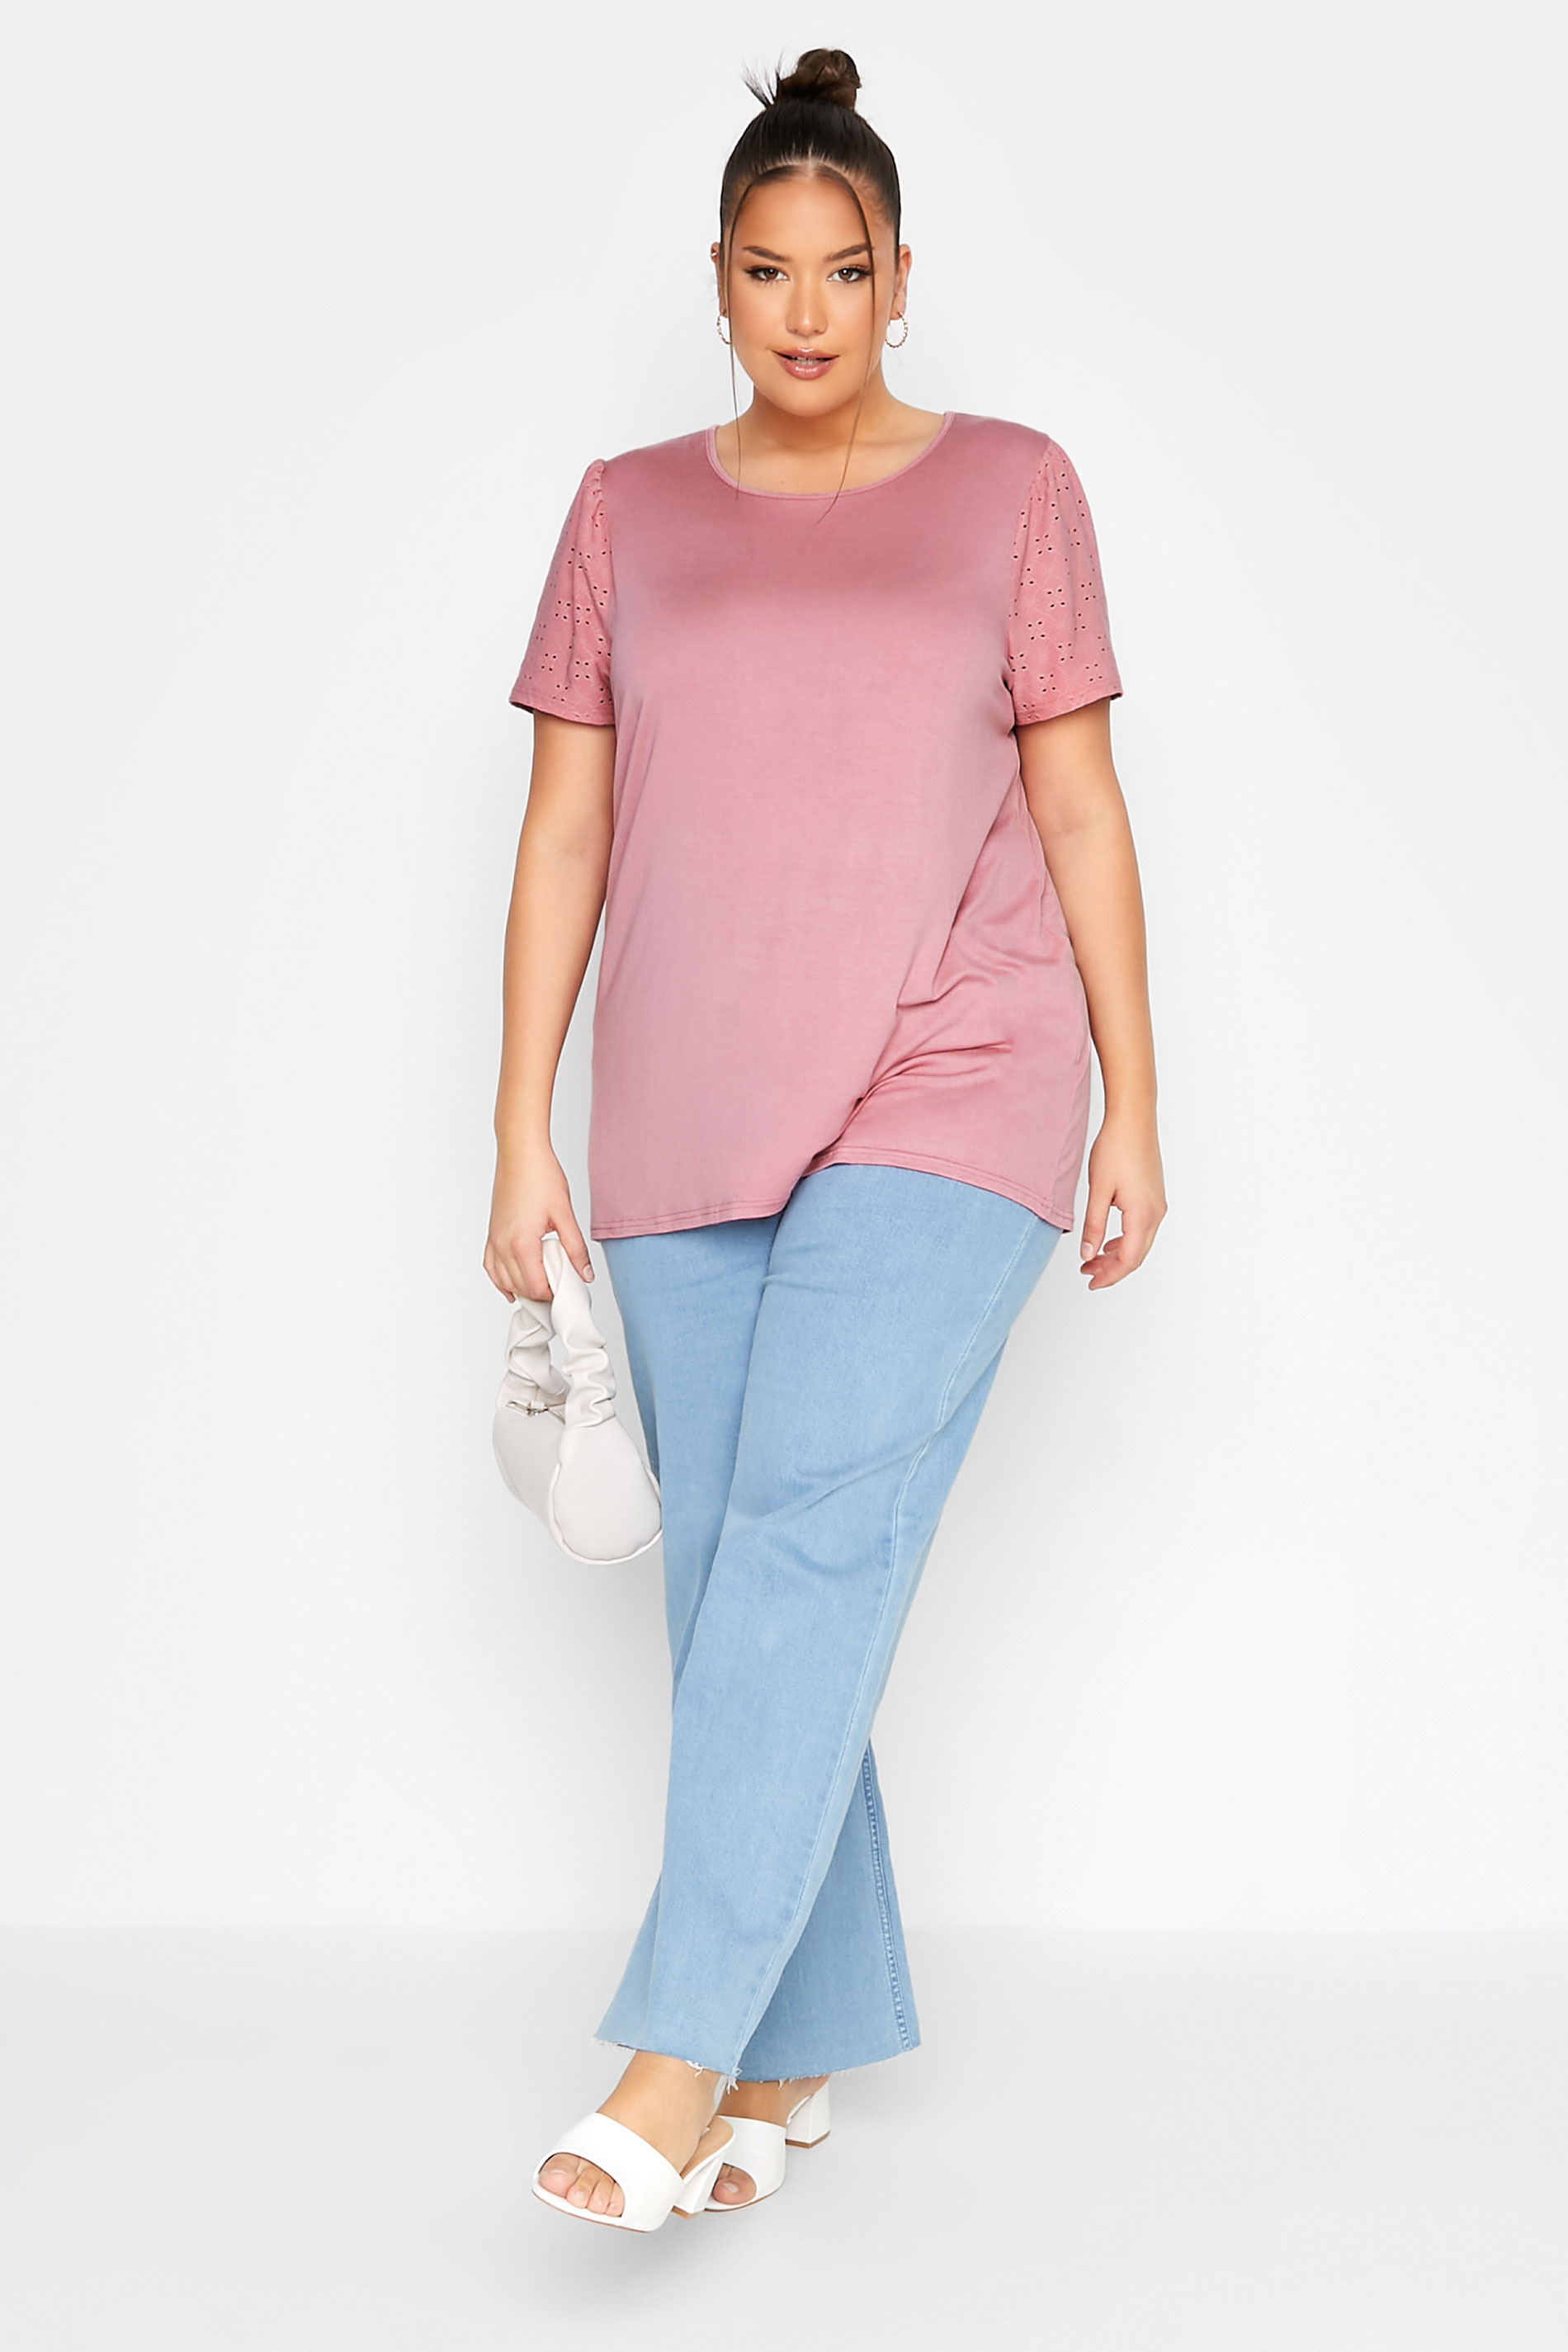 Grande taille  Tops Grande taille  T-Shirts | LIMITED COLLECTION - T-Shirt Rose Manches Broderie Anglaise - BT09241